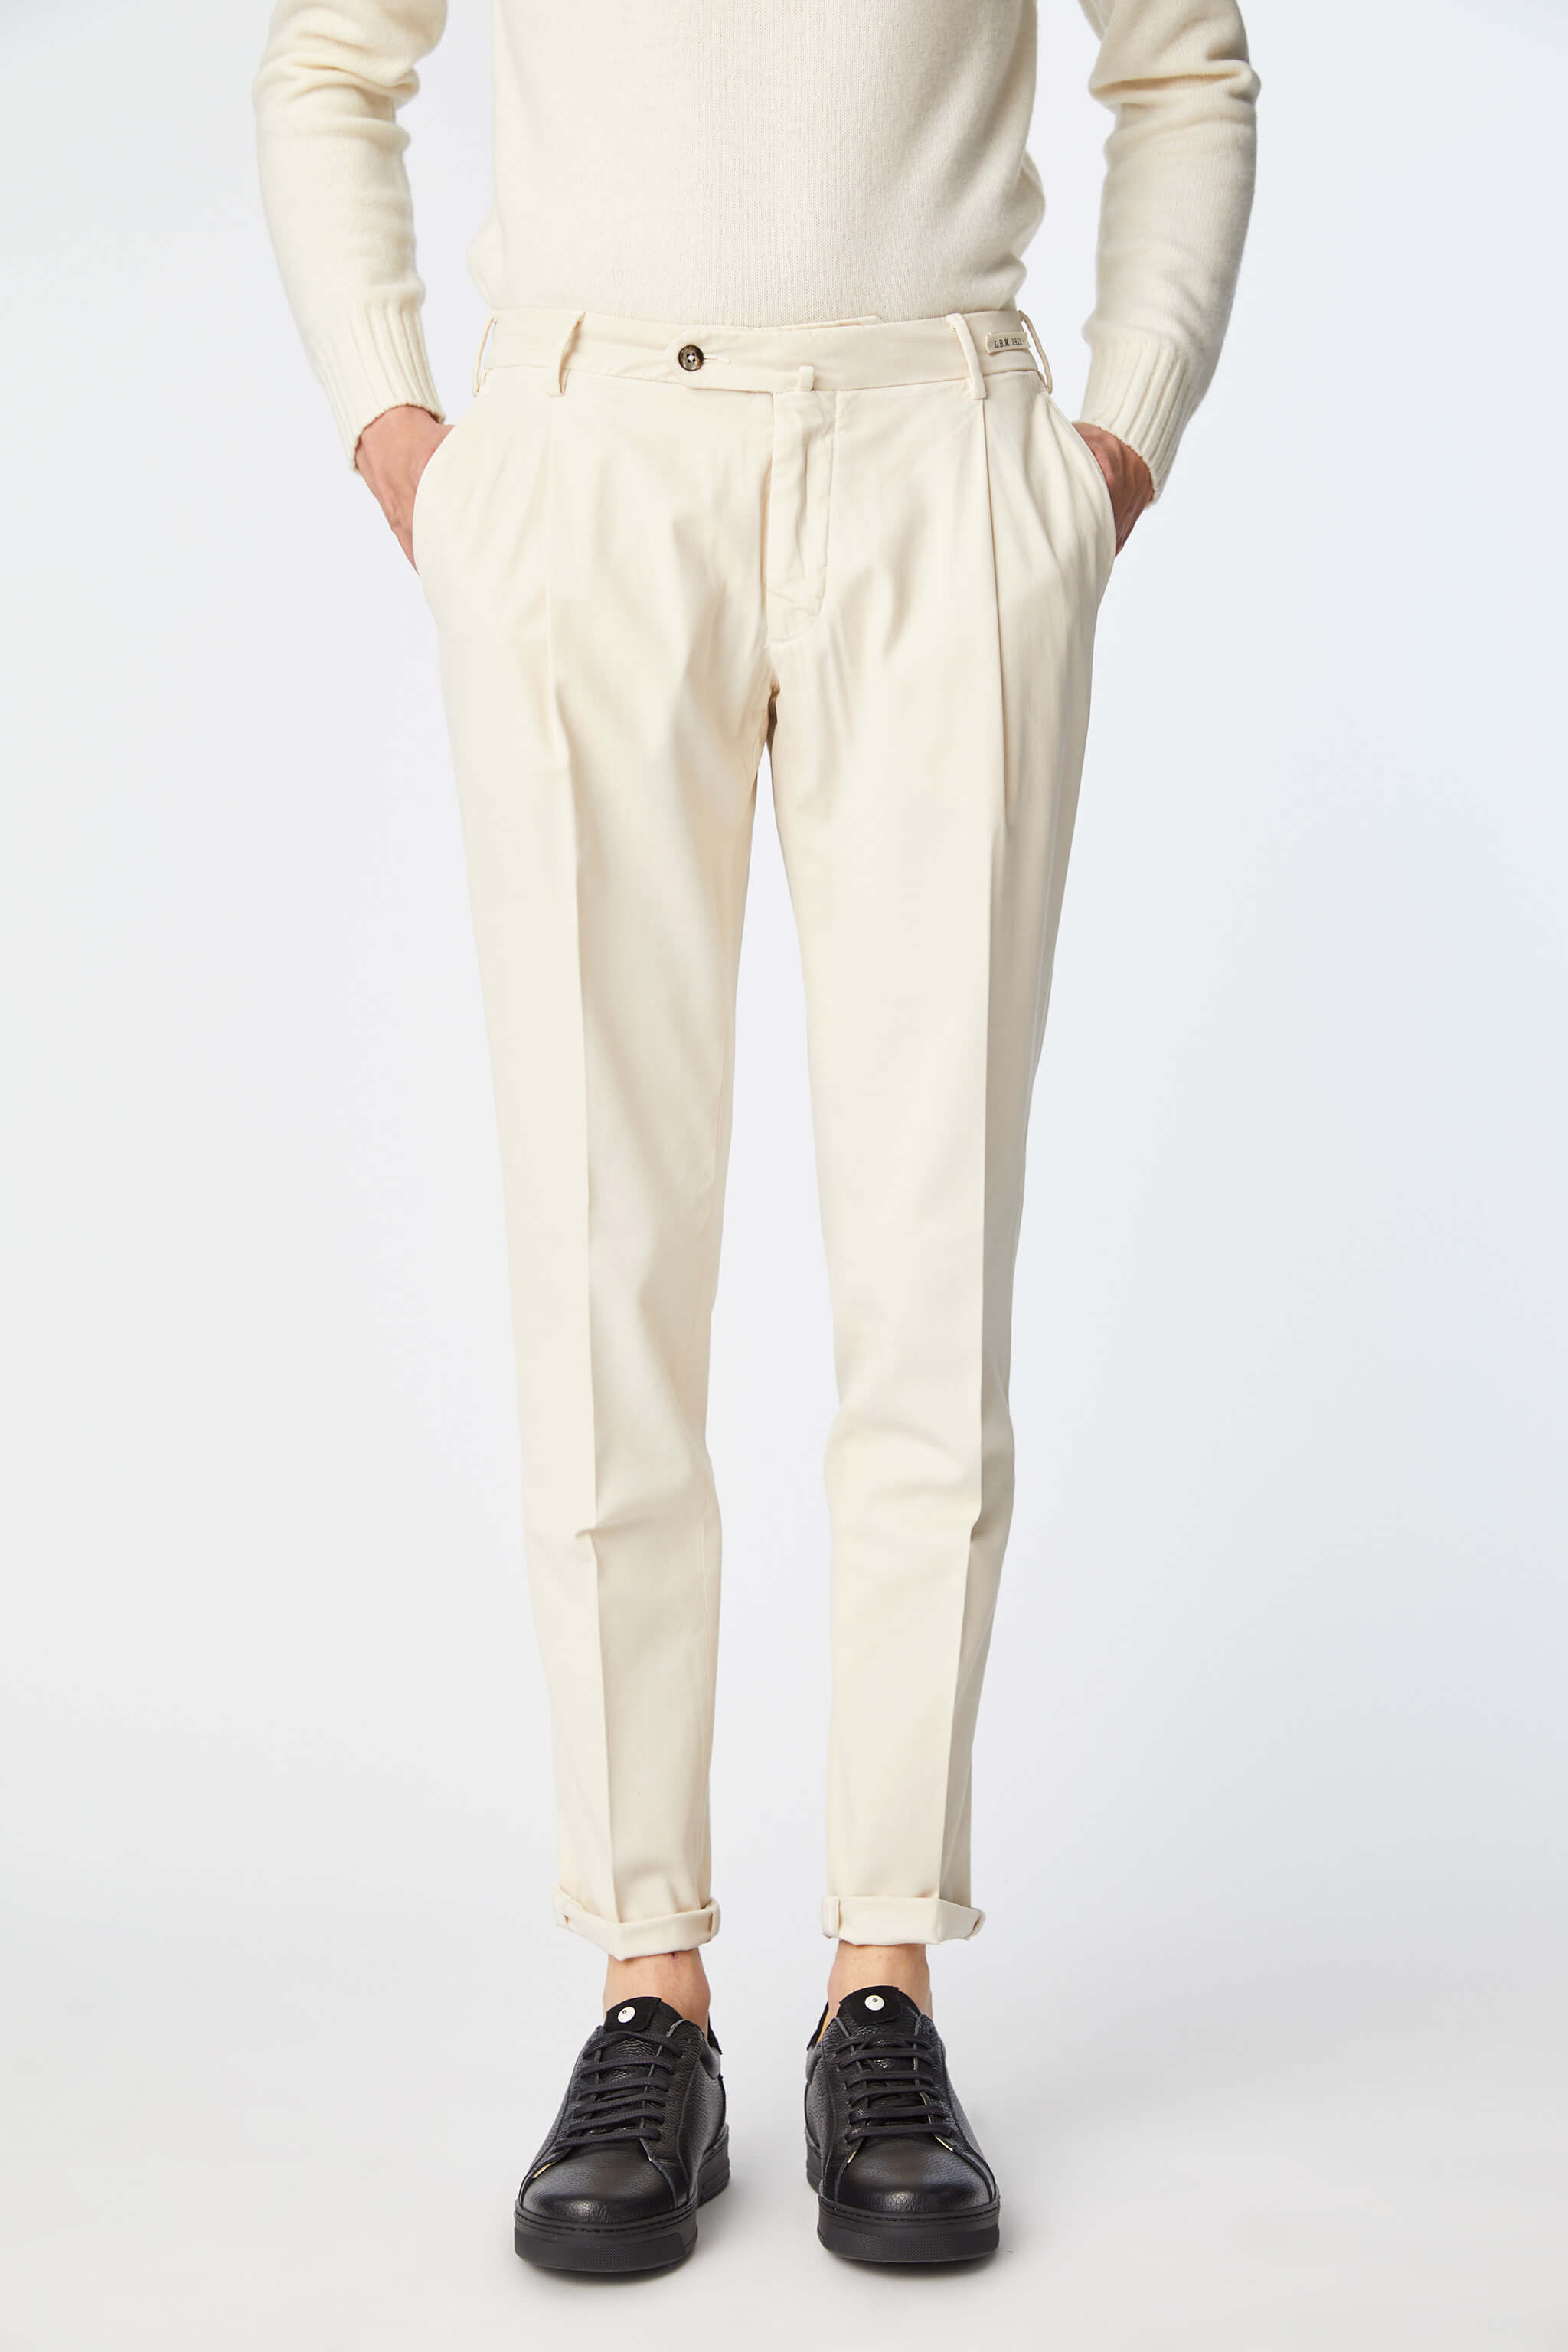 Garment-dyed MUDDY pants in white